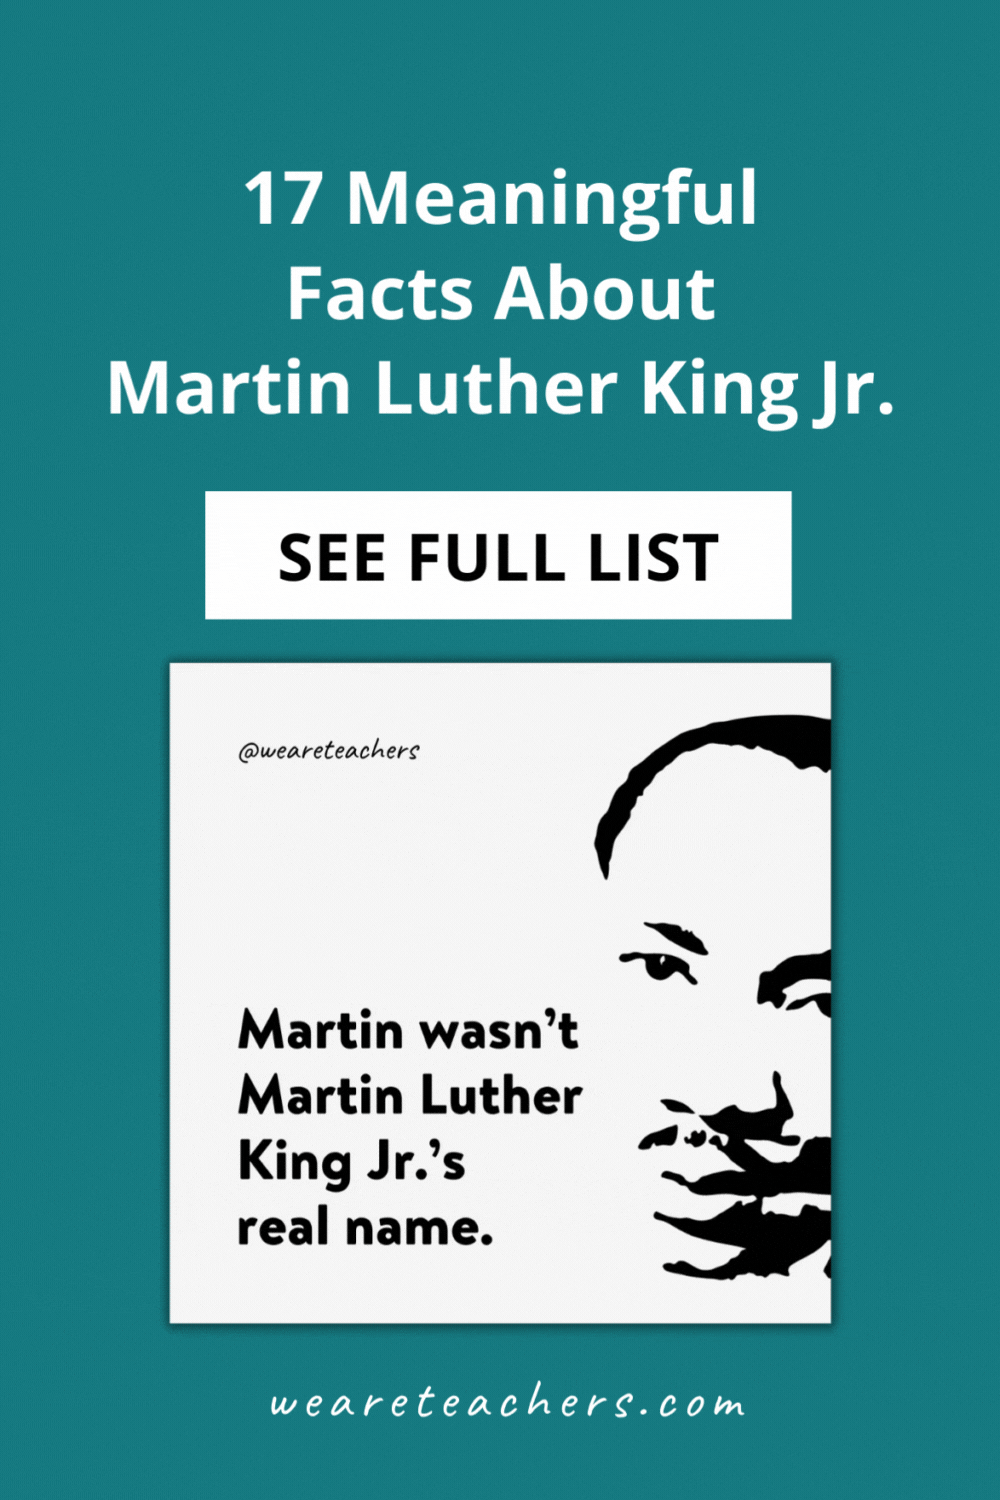 He lived an incredible life and accomplished so much for human rights. Here are some facts about Martin Luther King Jr. to learn and share.